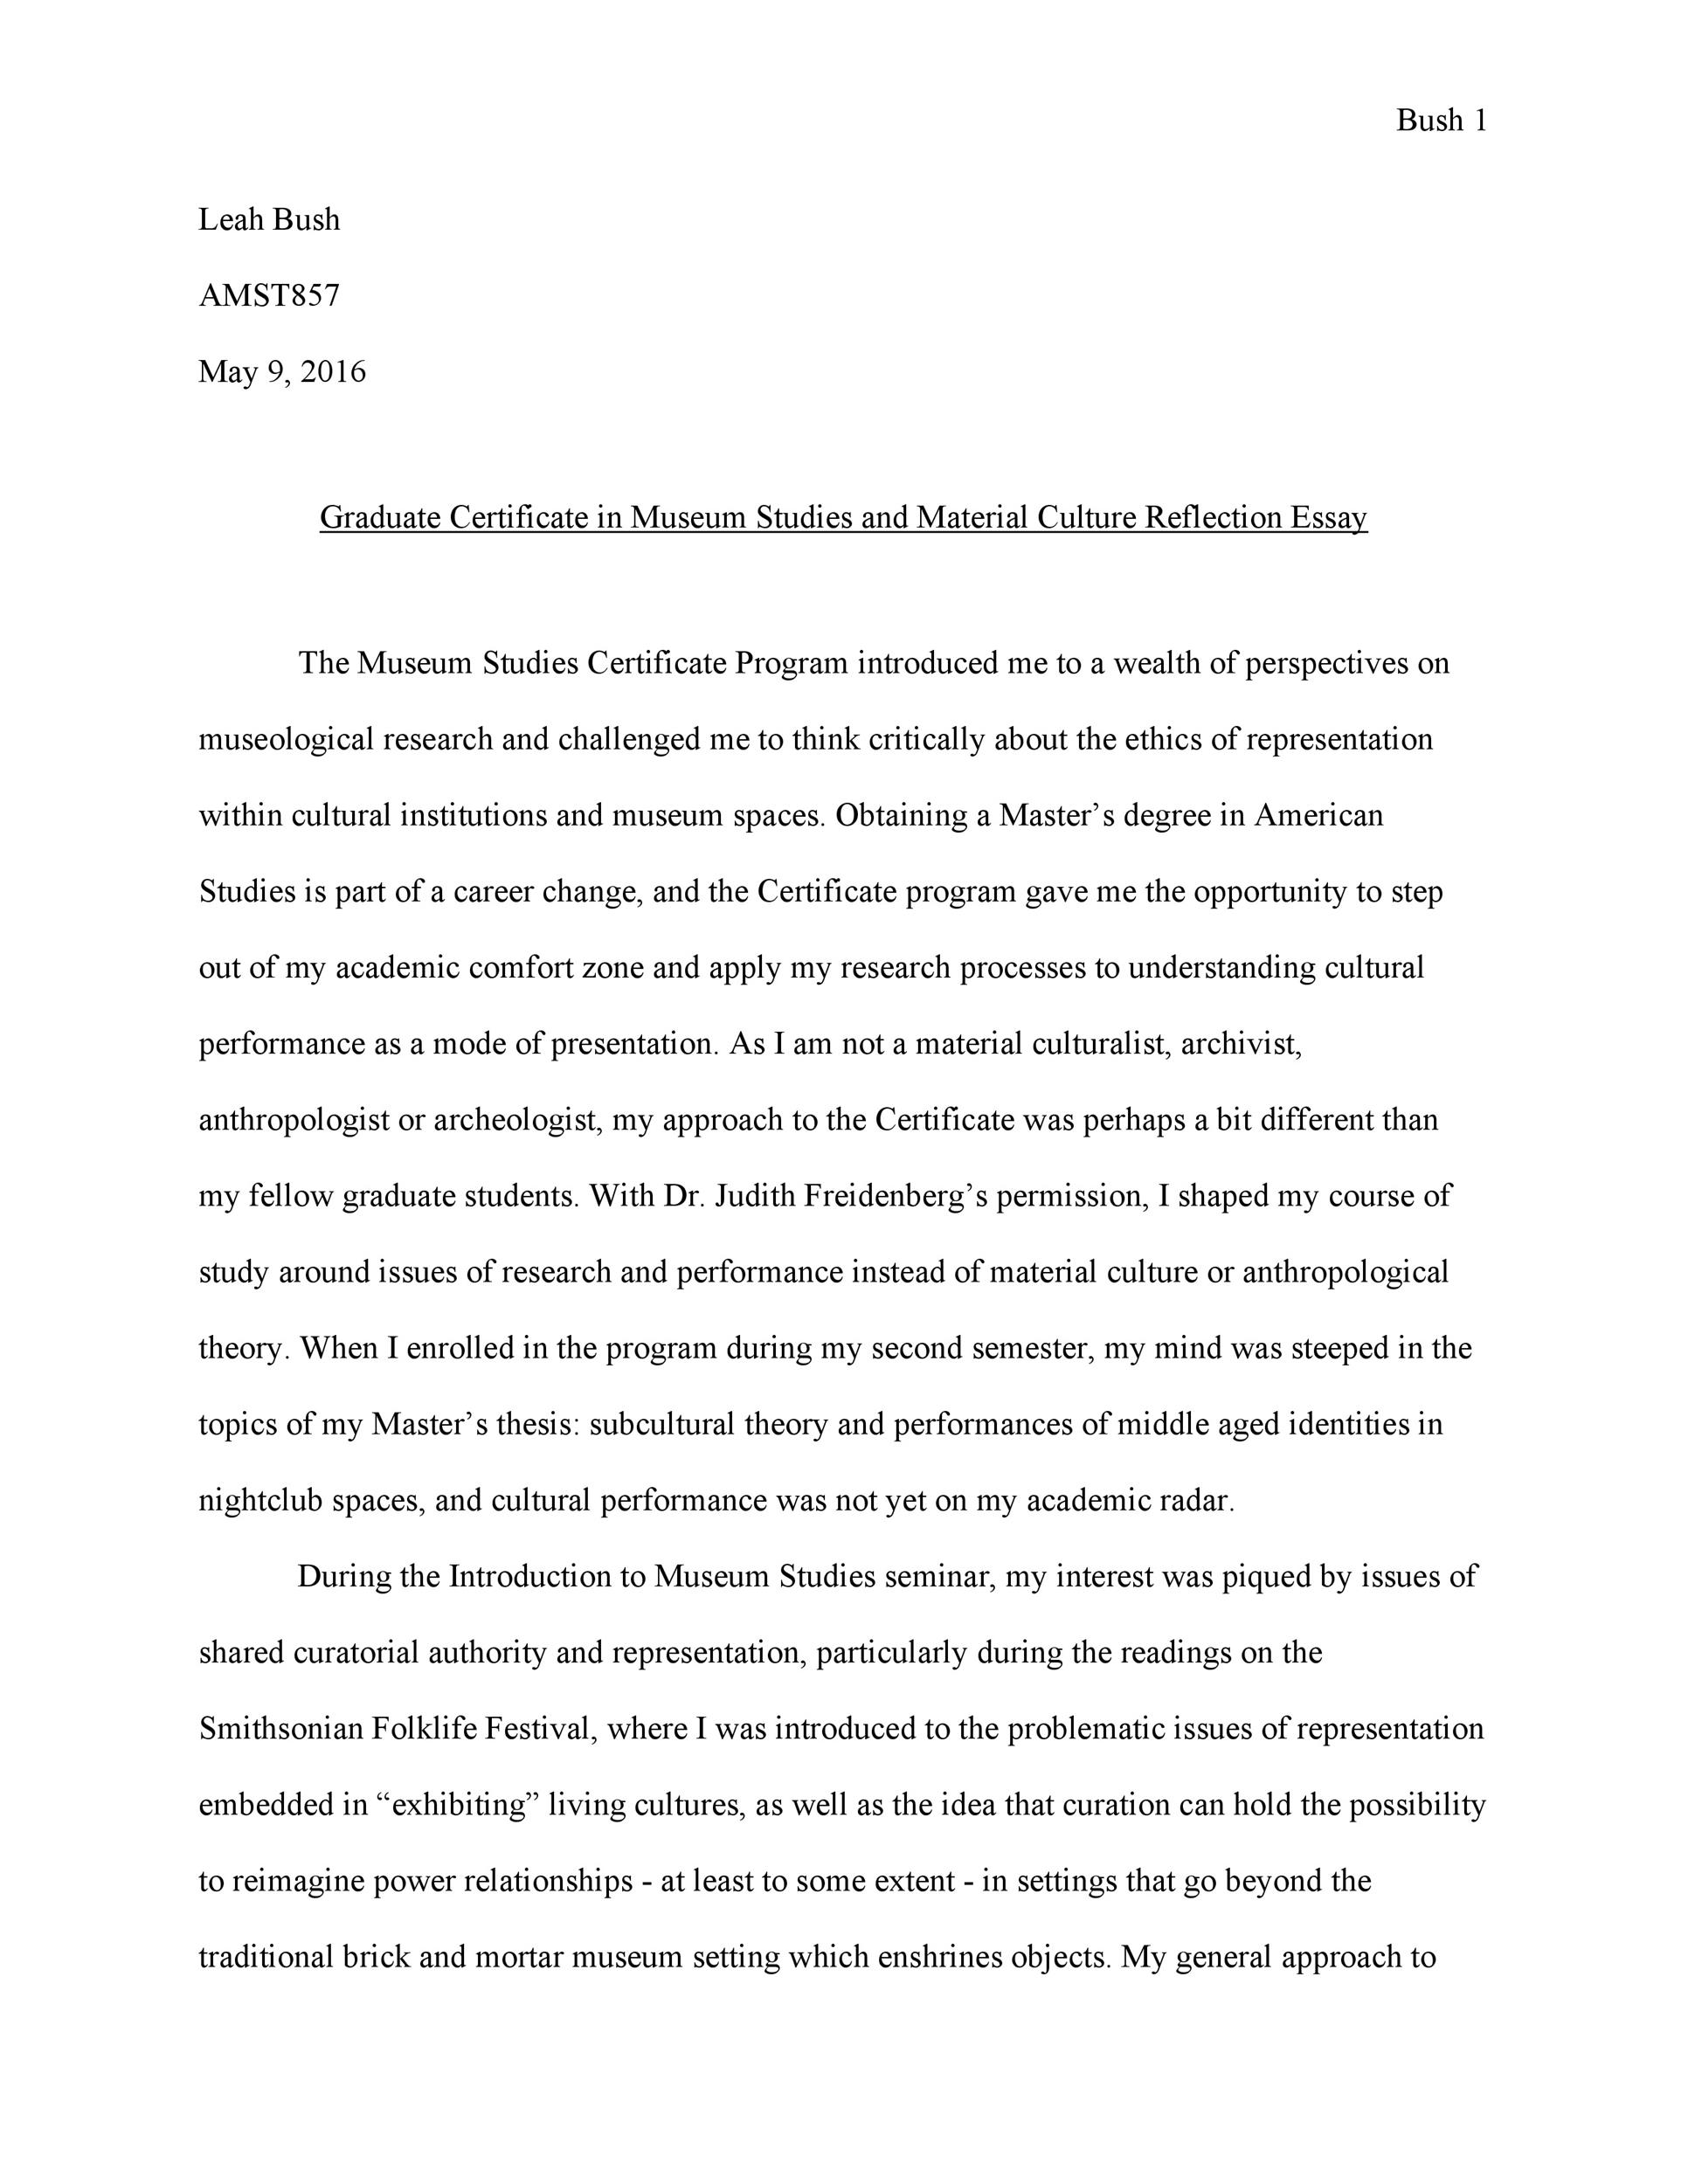 writing a reflective essay introduction